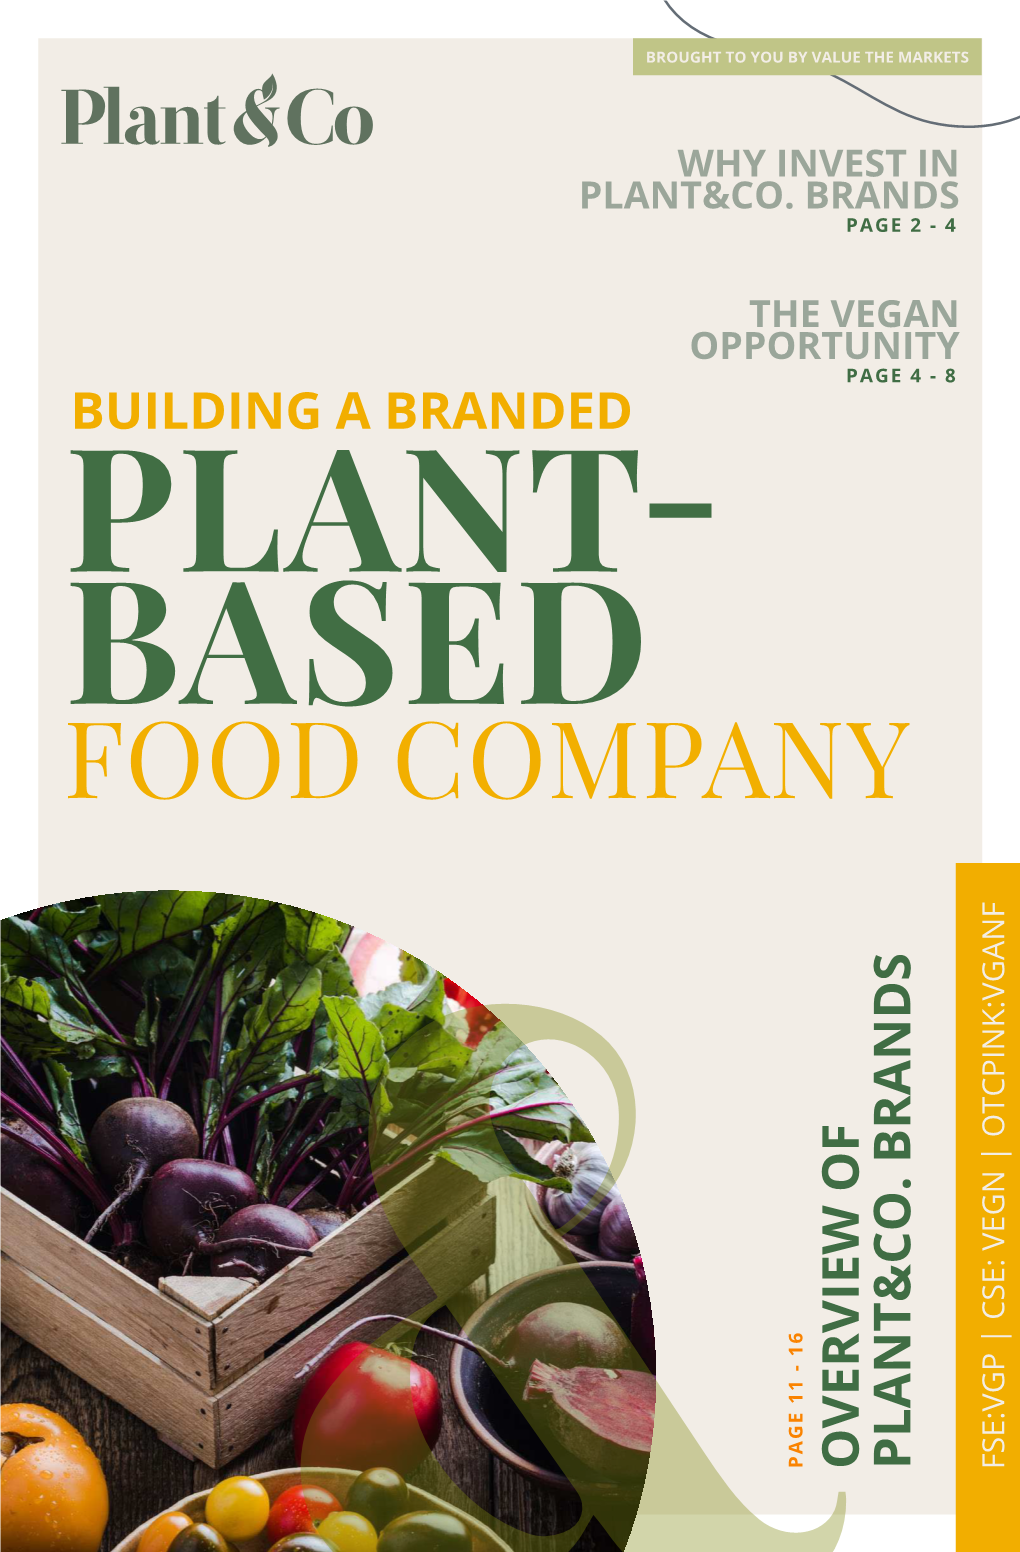 Why Invest in Plant&Co. Brands